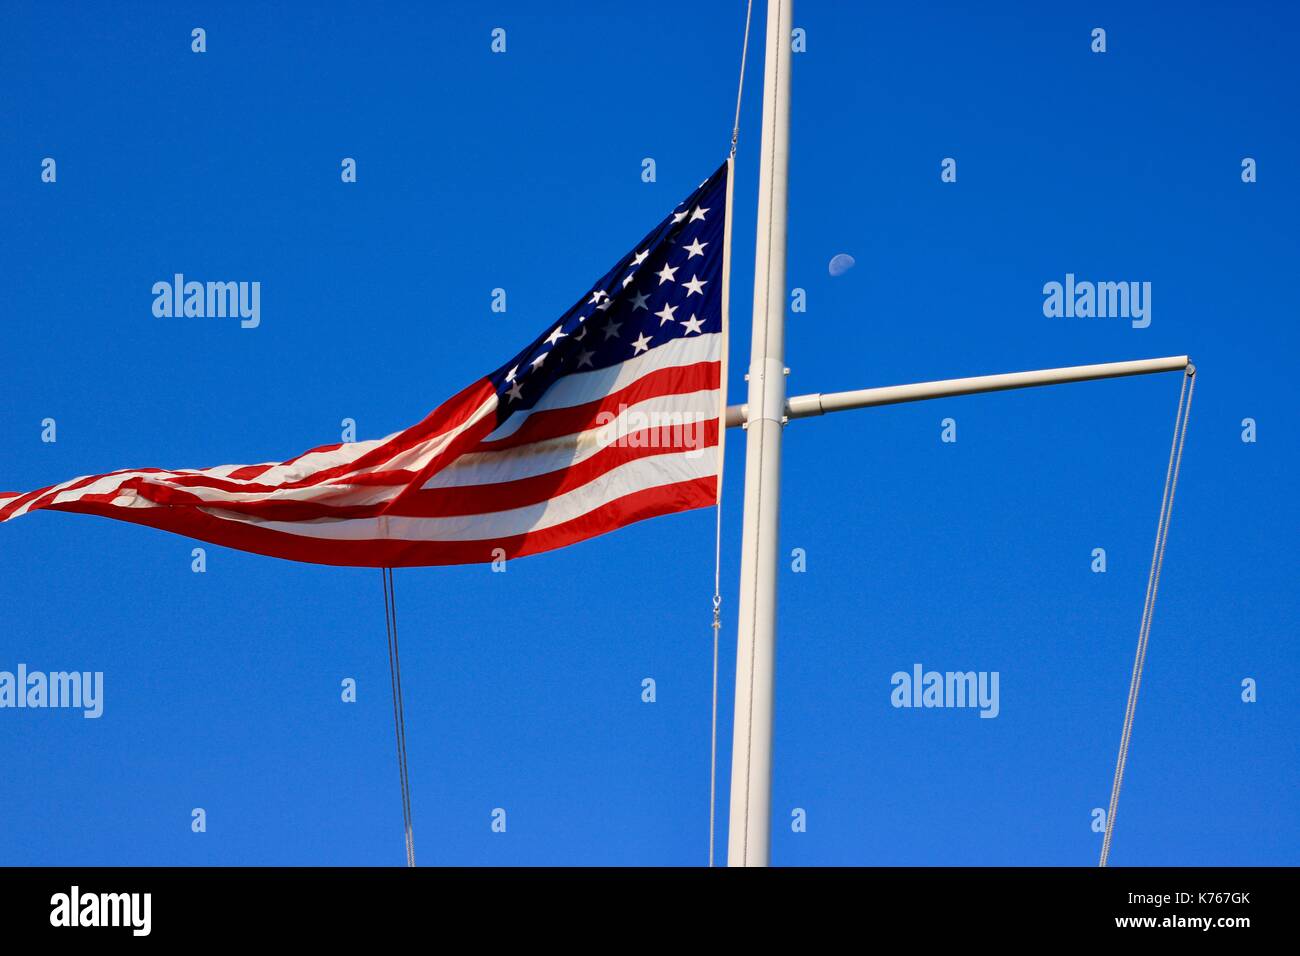 9/11 Remembrance Waving Old Glory American Flag Stock Photo